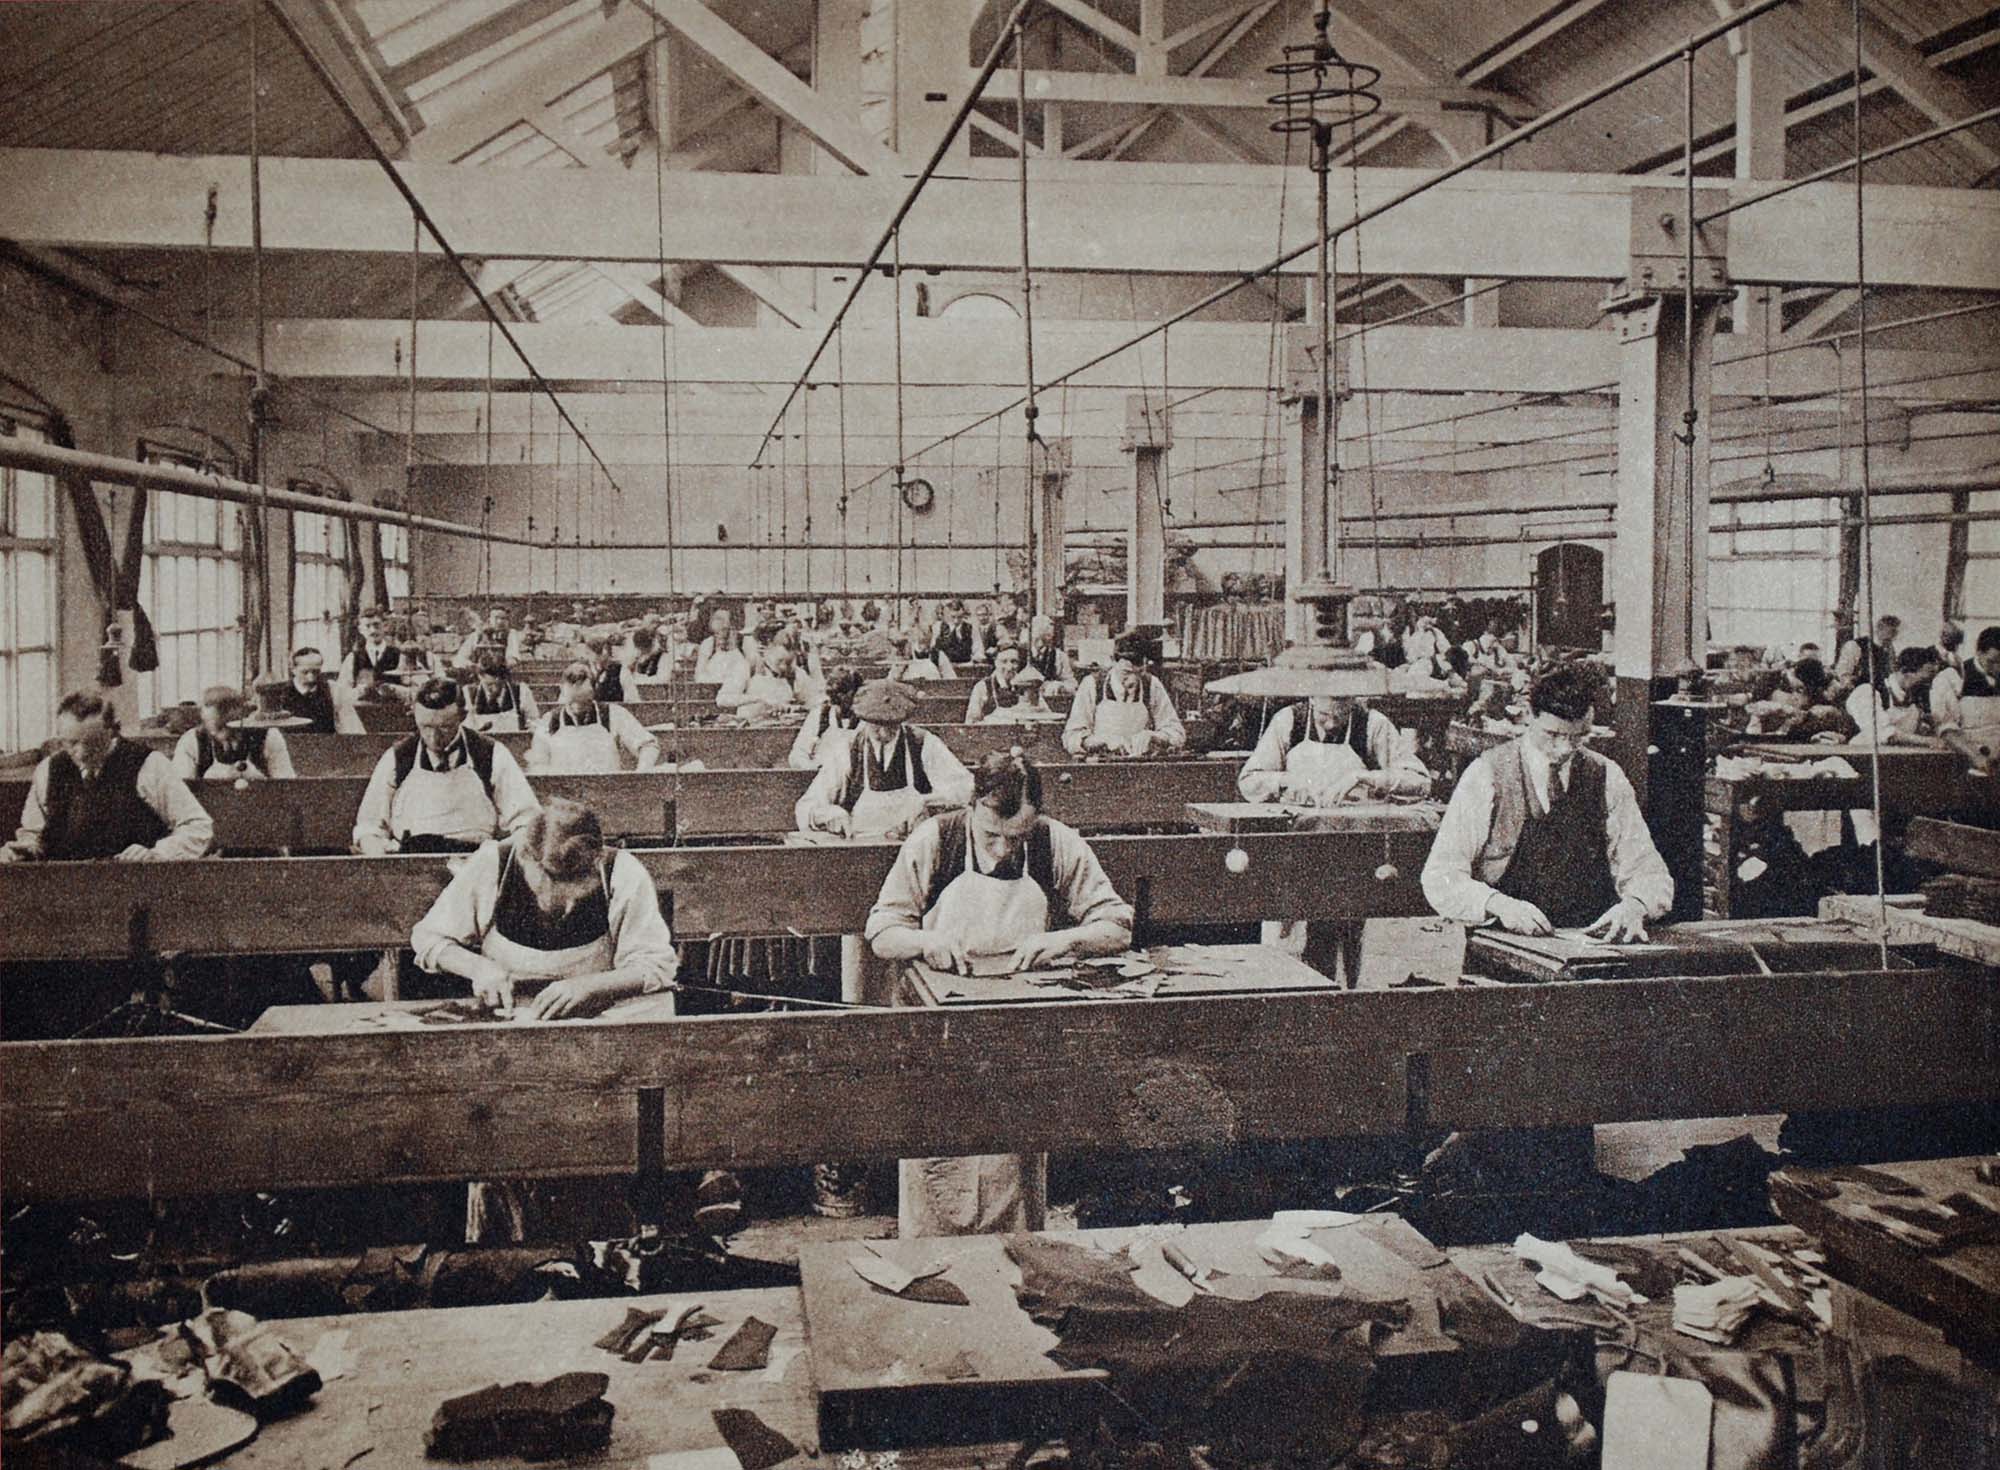 The factory floor of a shoe manufacturing company in Leicester, 1930s - 